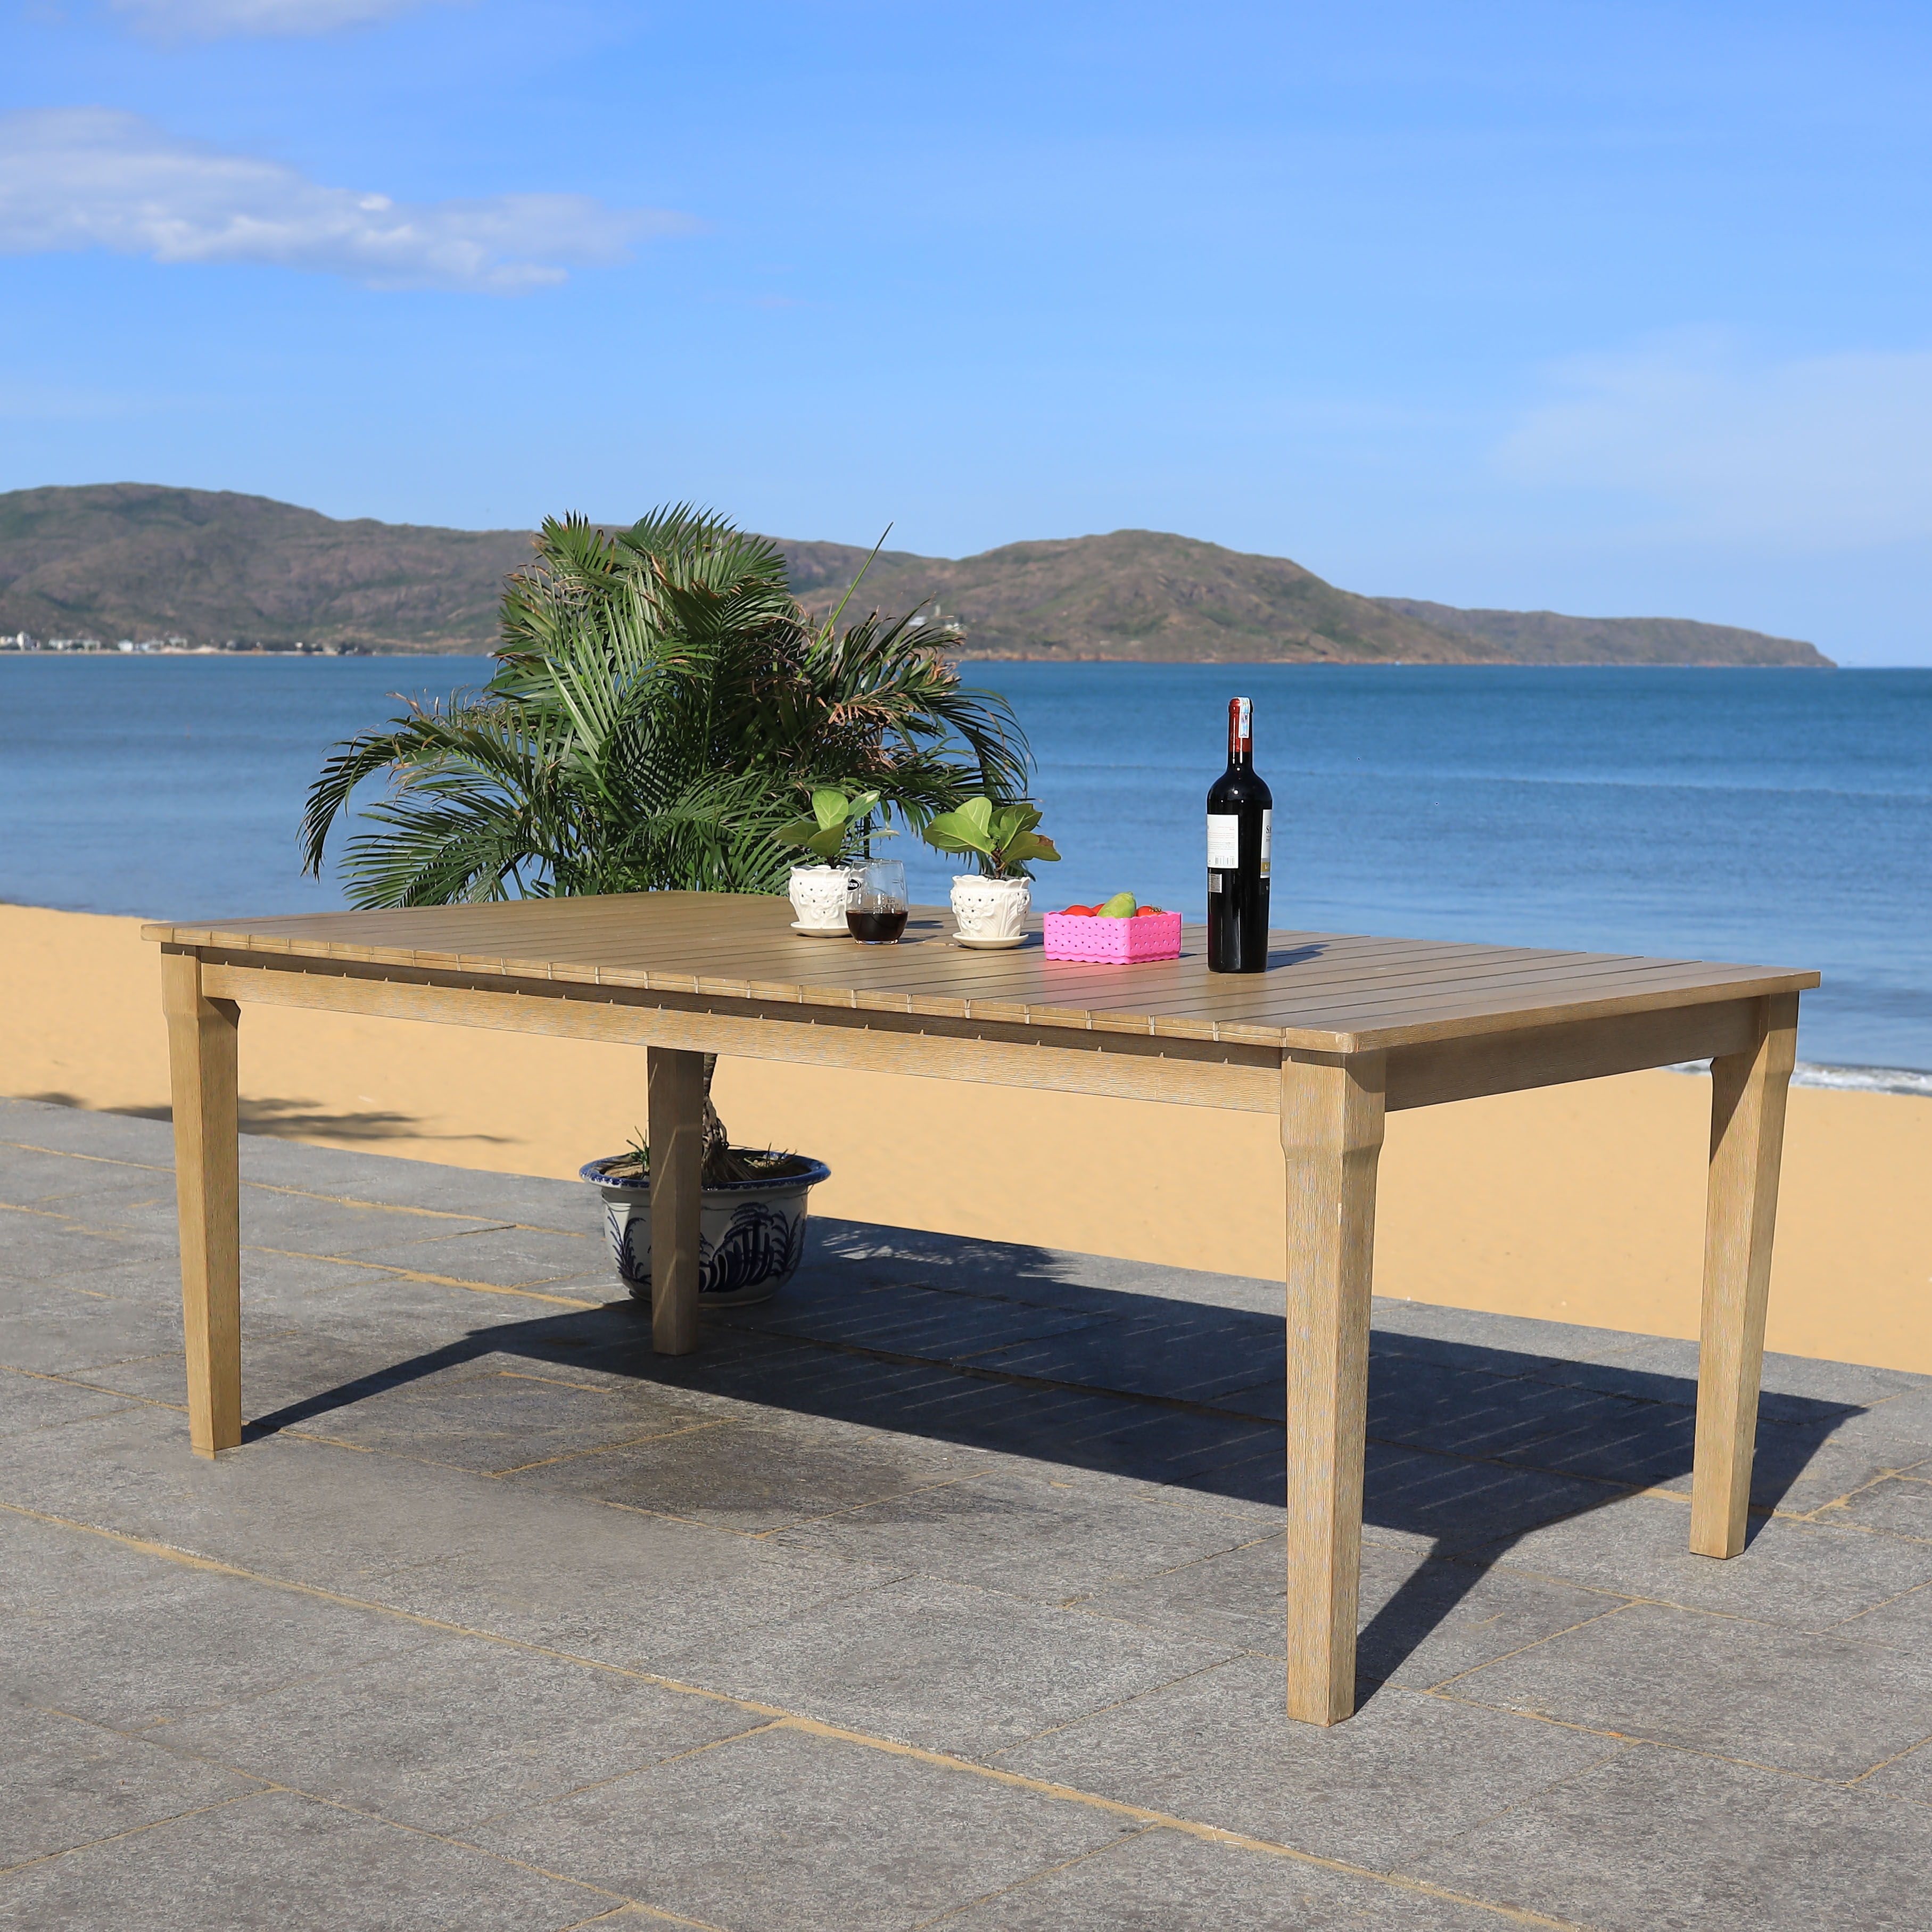 Dominica Wooden Outdoor Dining Table - Natural - Arlo Home - Image 2